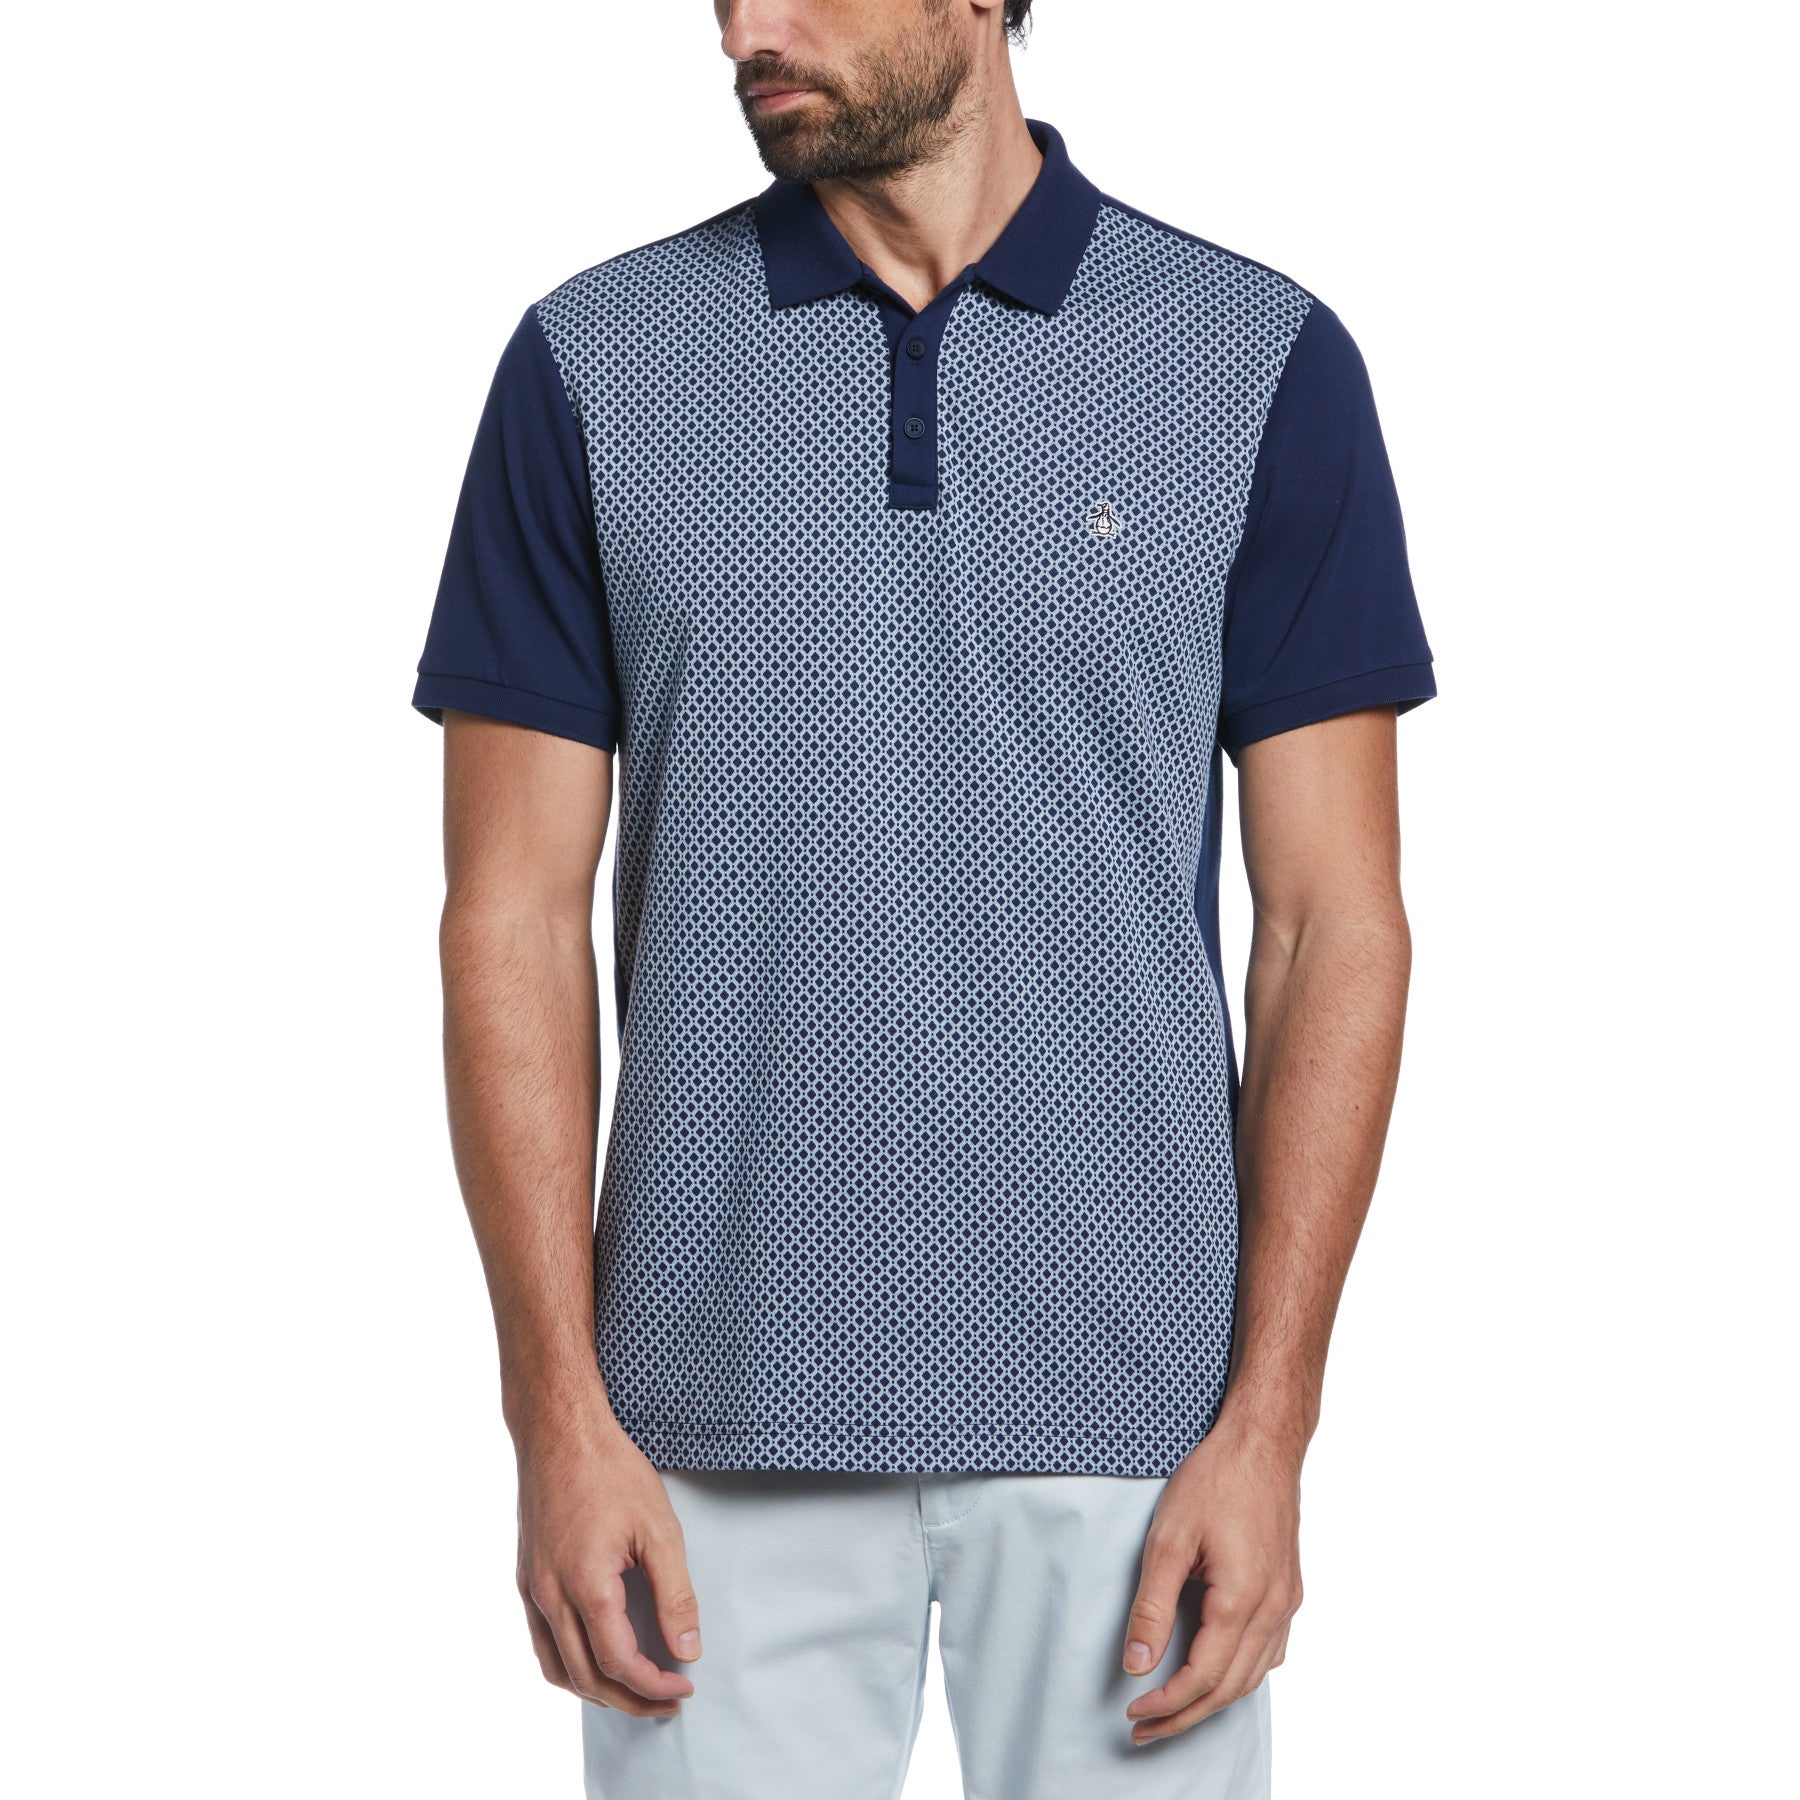 View Jacquard Front Polo Shirt In Dress Blues information